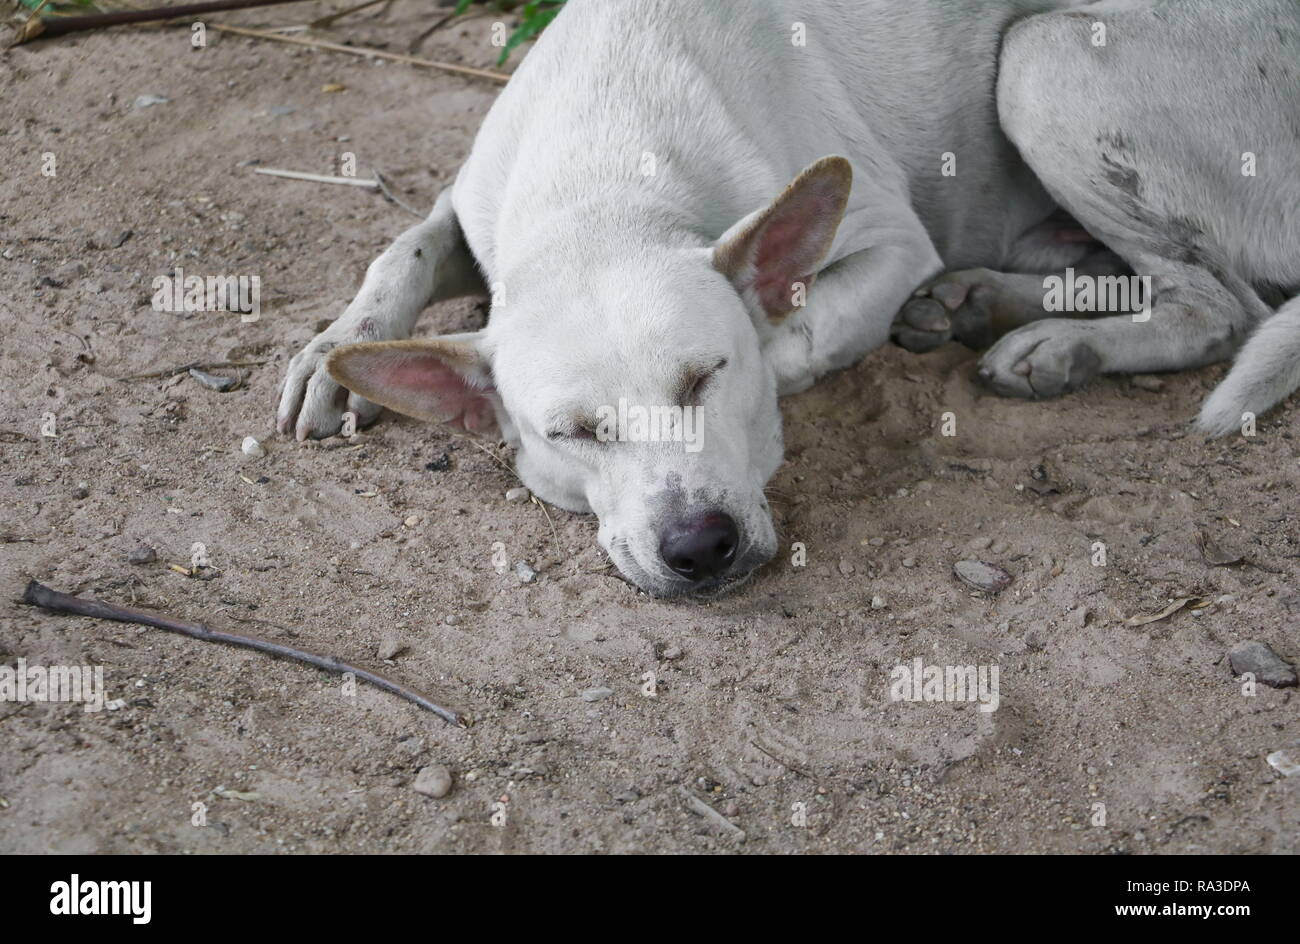 Page 2 - Vagabond Dog High Resolution Stock Photography and Images - Alamy